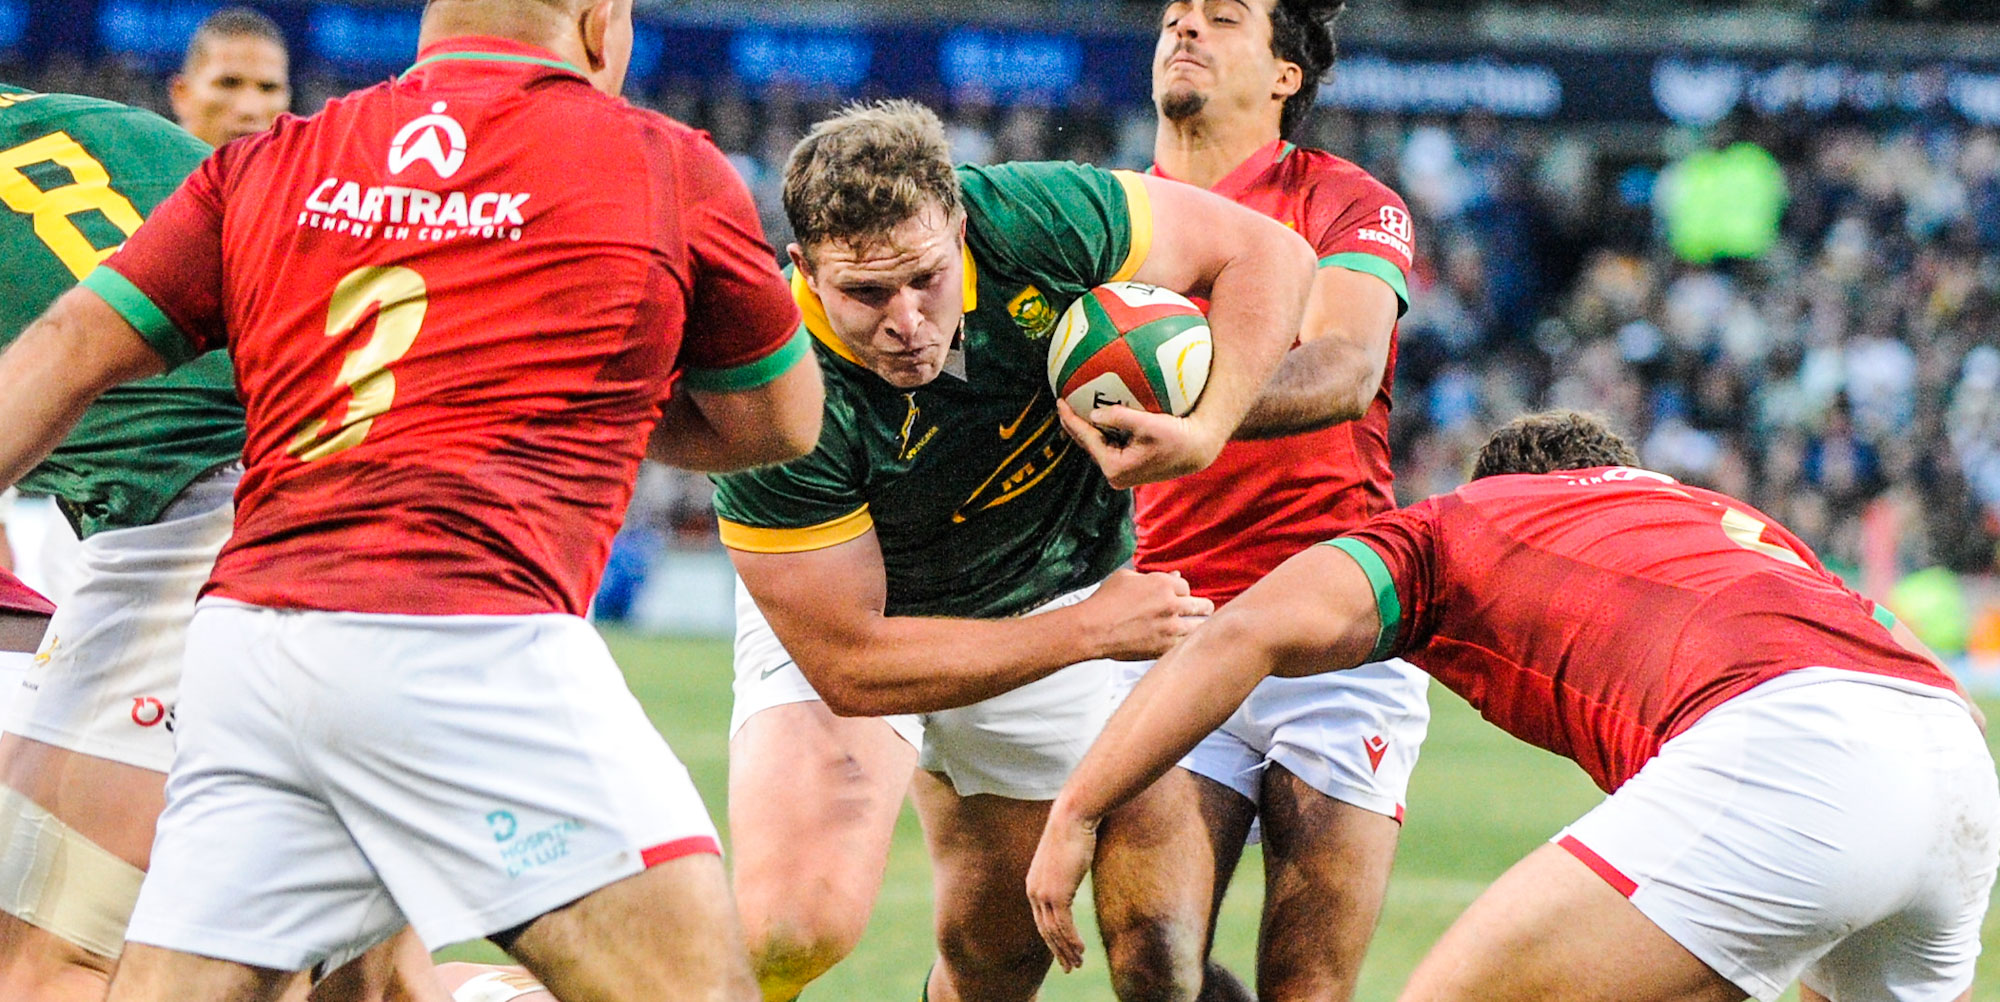 Jan-Hendrik Wessels scored a try on debut for the Springboks against Portugal in Bloem, where he grew up.